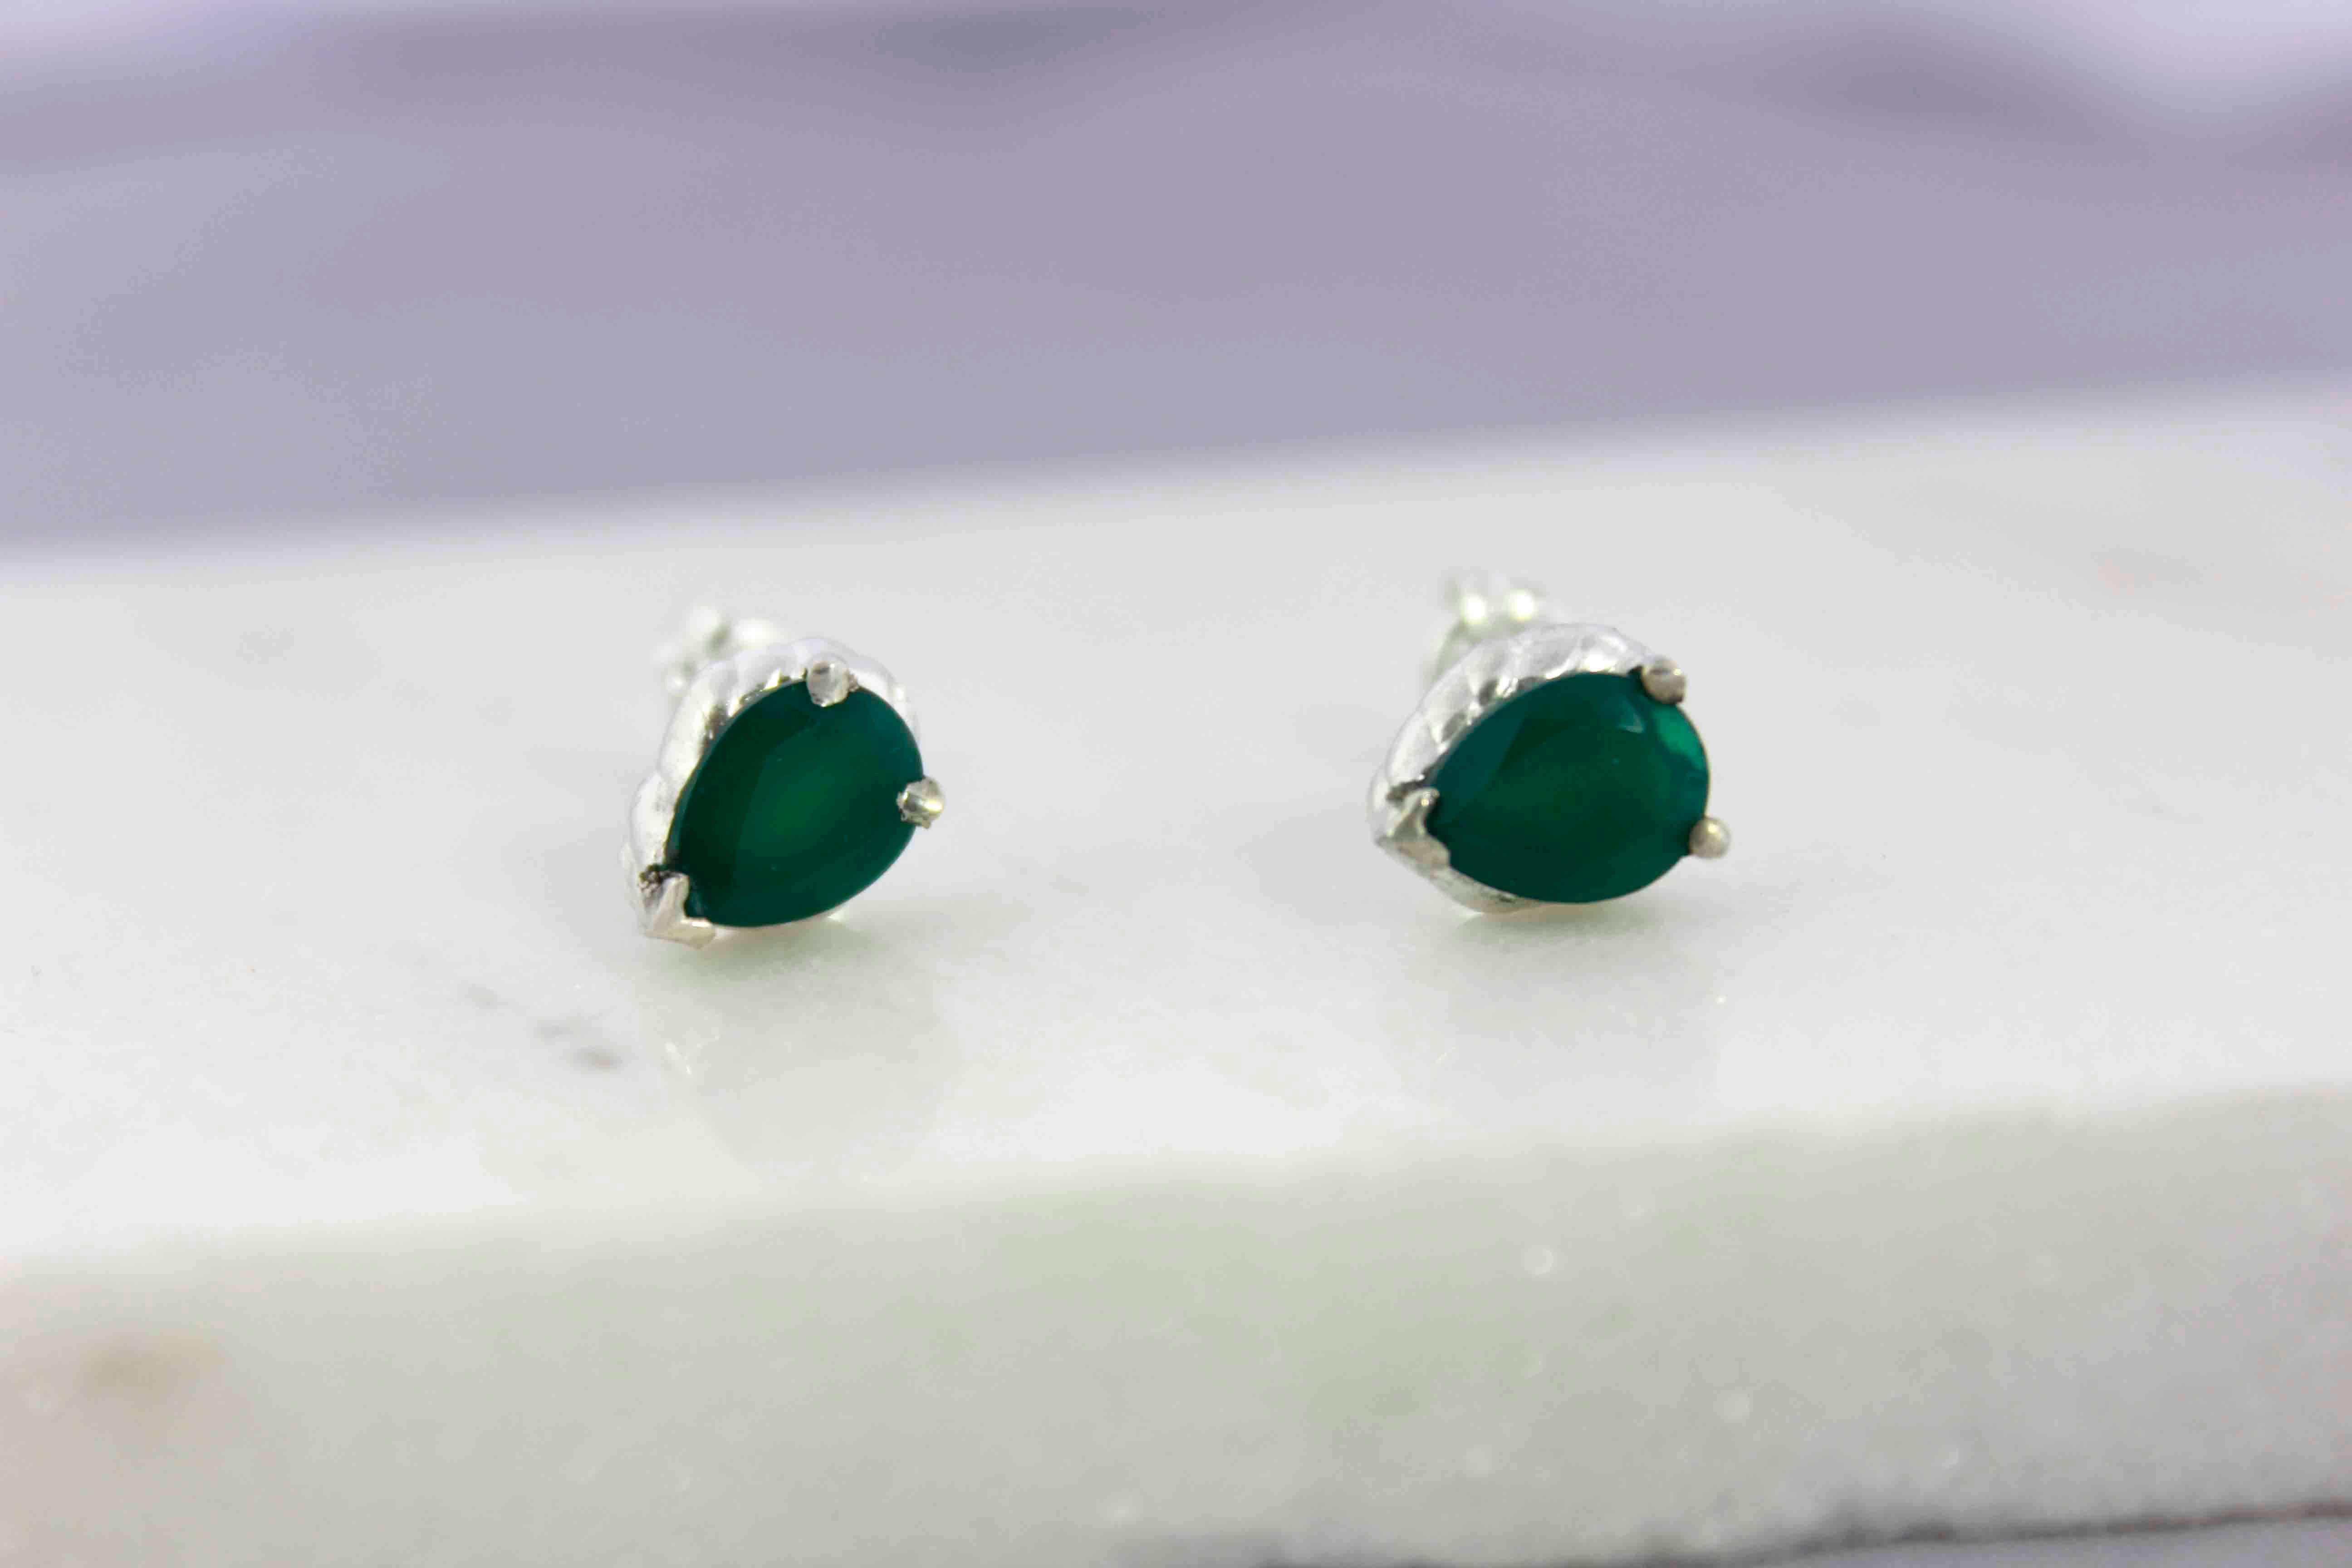 The Classic Green Agate Earrings are featuring two deep green agate stones.

These delicate earrings have a original and classic style, while highlighting a personal spin!

Stone size 6×8 mm

For available stones and colours please get in touch. We